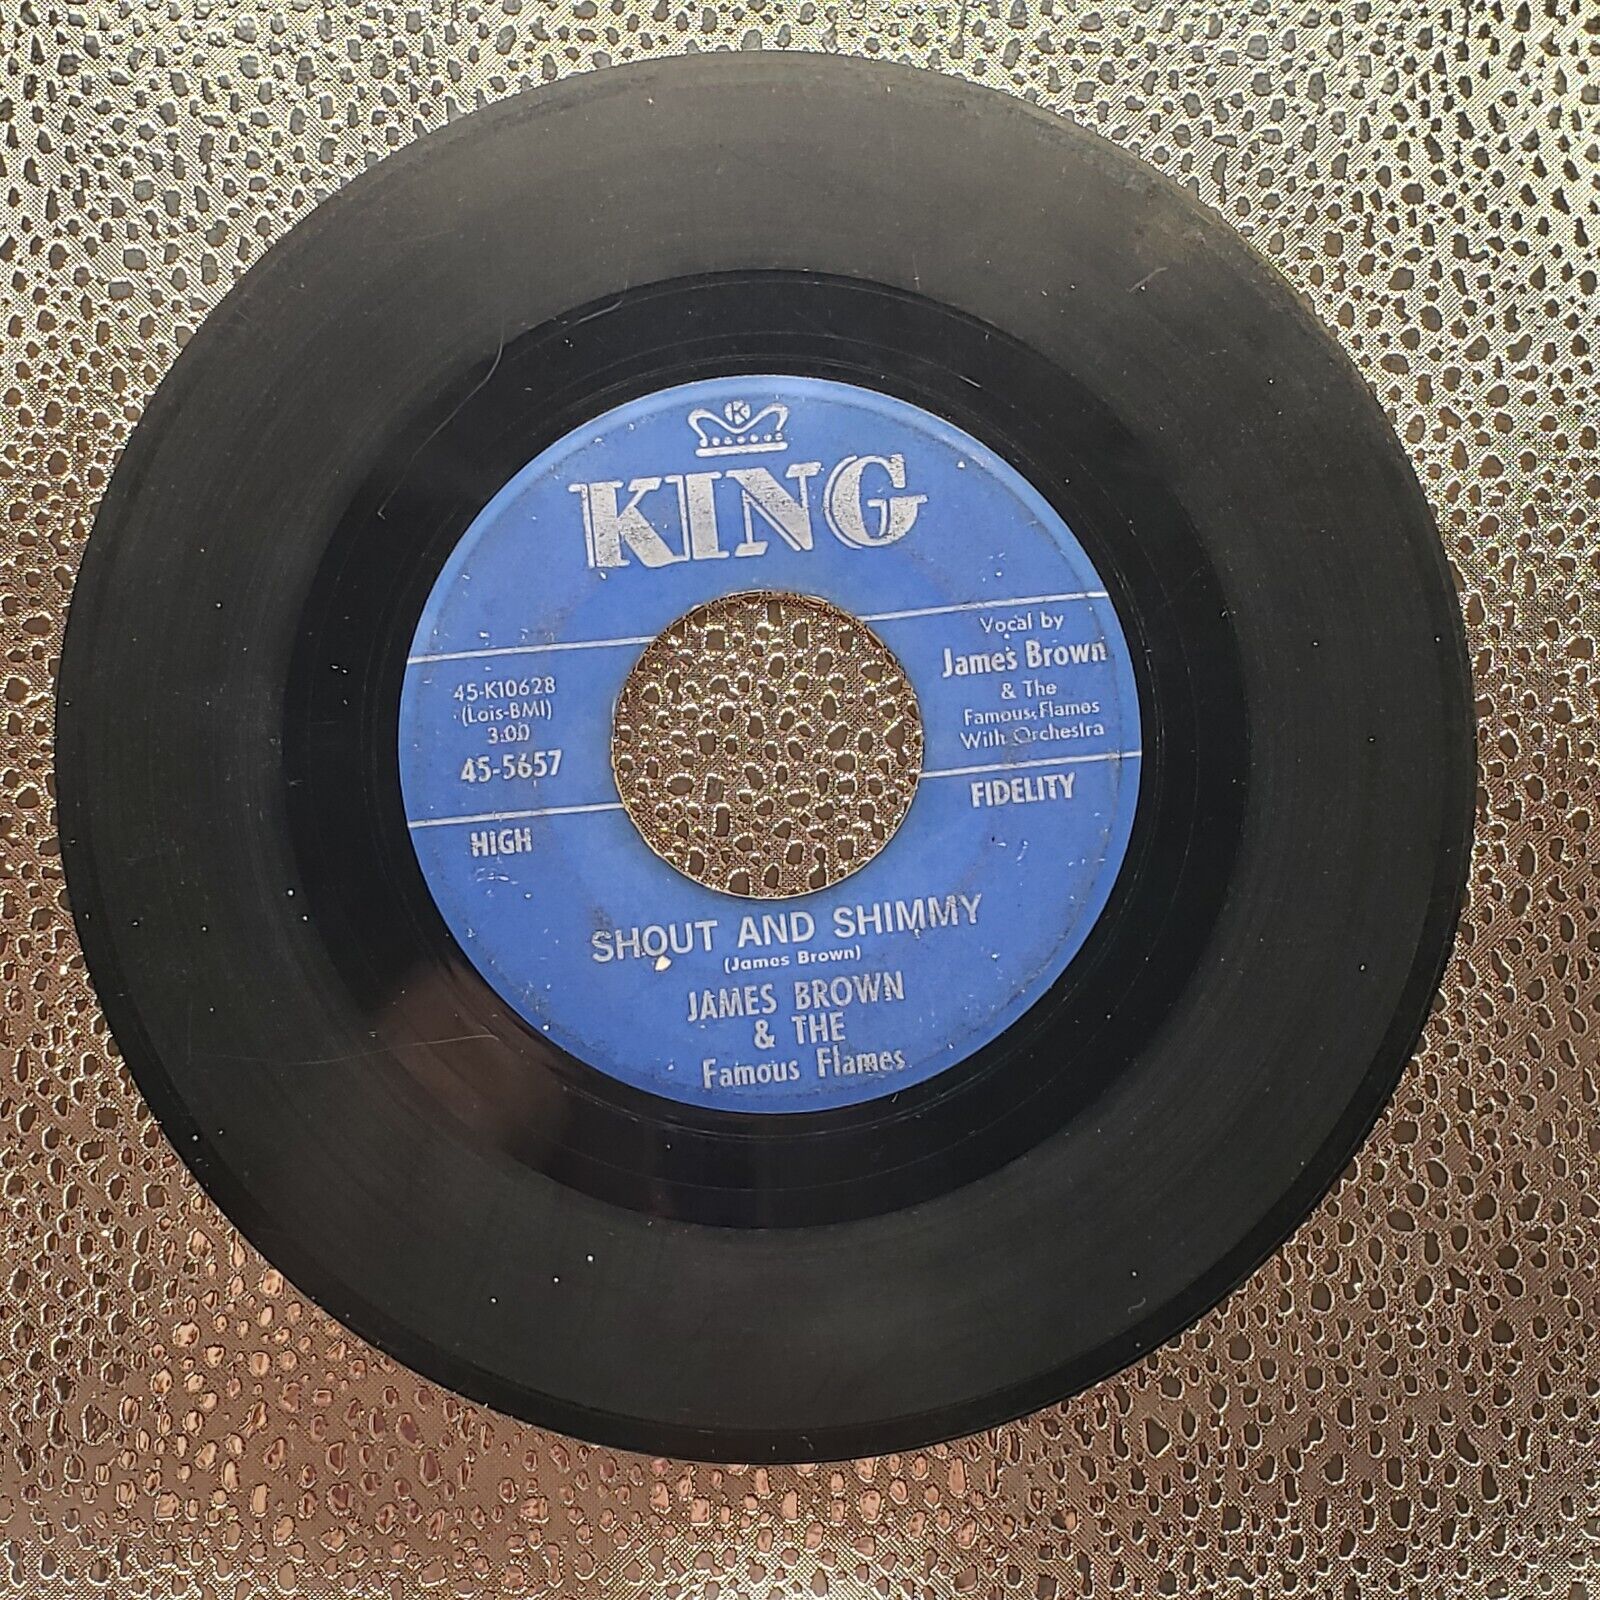 James Brown - Come Over Here; Shout And Shimmy - 45-5657 Vinyl Record 45 RPM